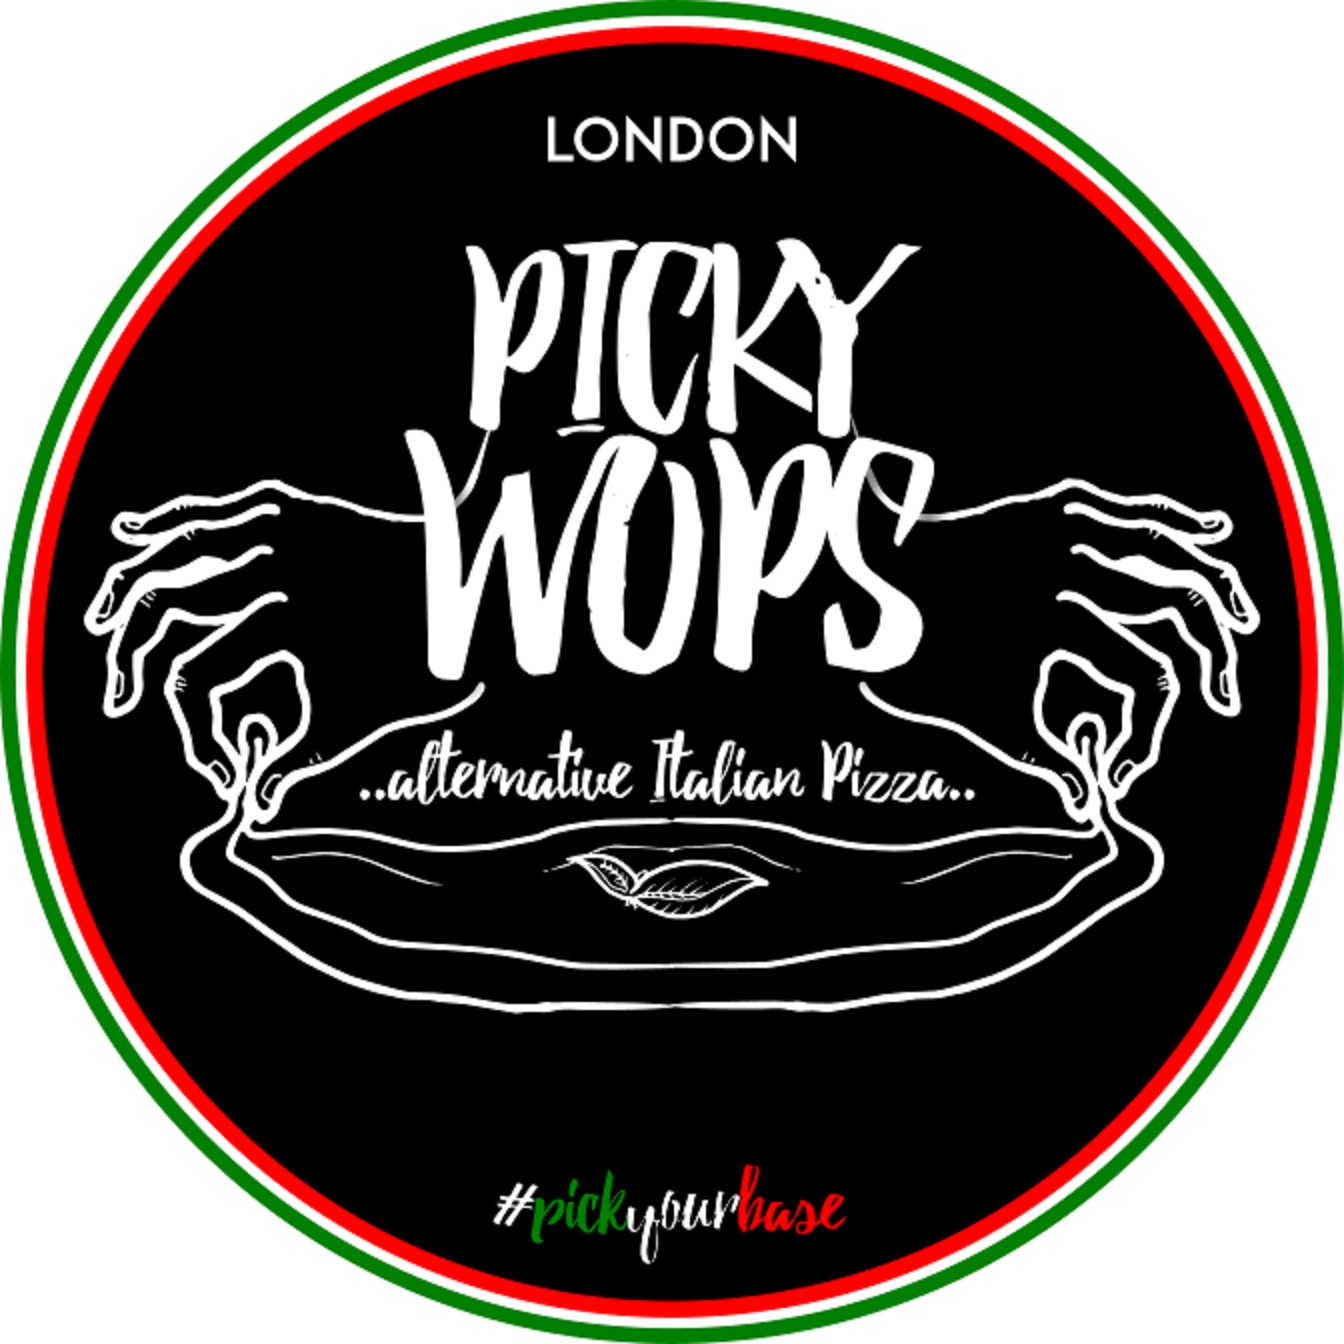 Picky Wops - Fulham